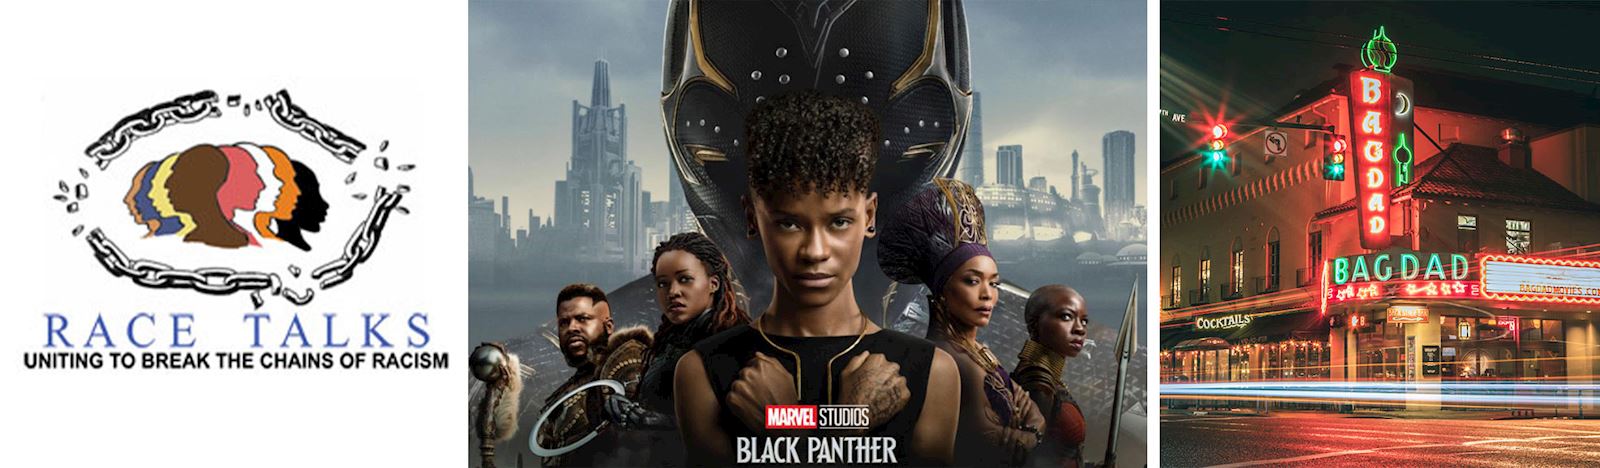 <h3>Special Showing Of Black Panther: Wakanda Forever In Partnership With Race Talks</h3>